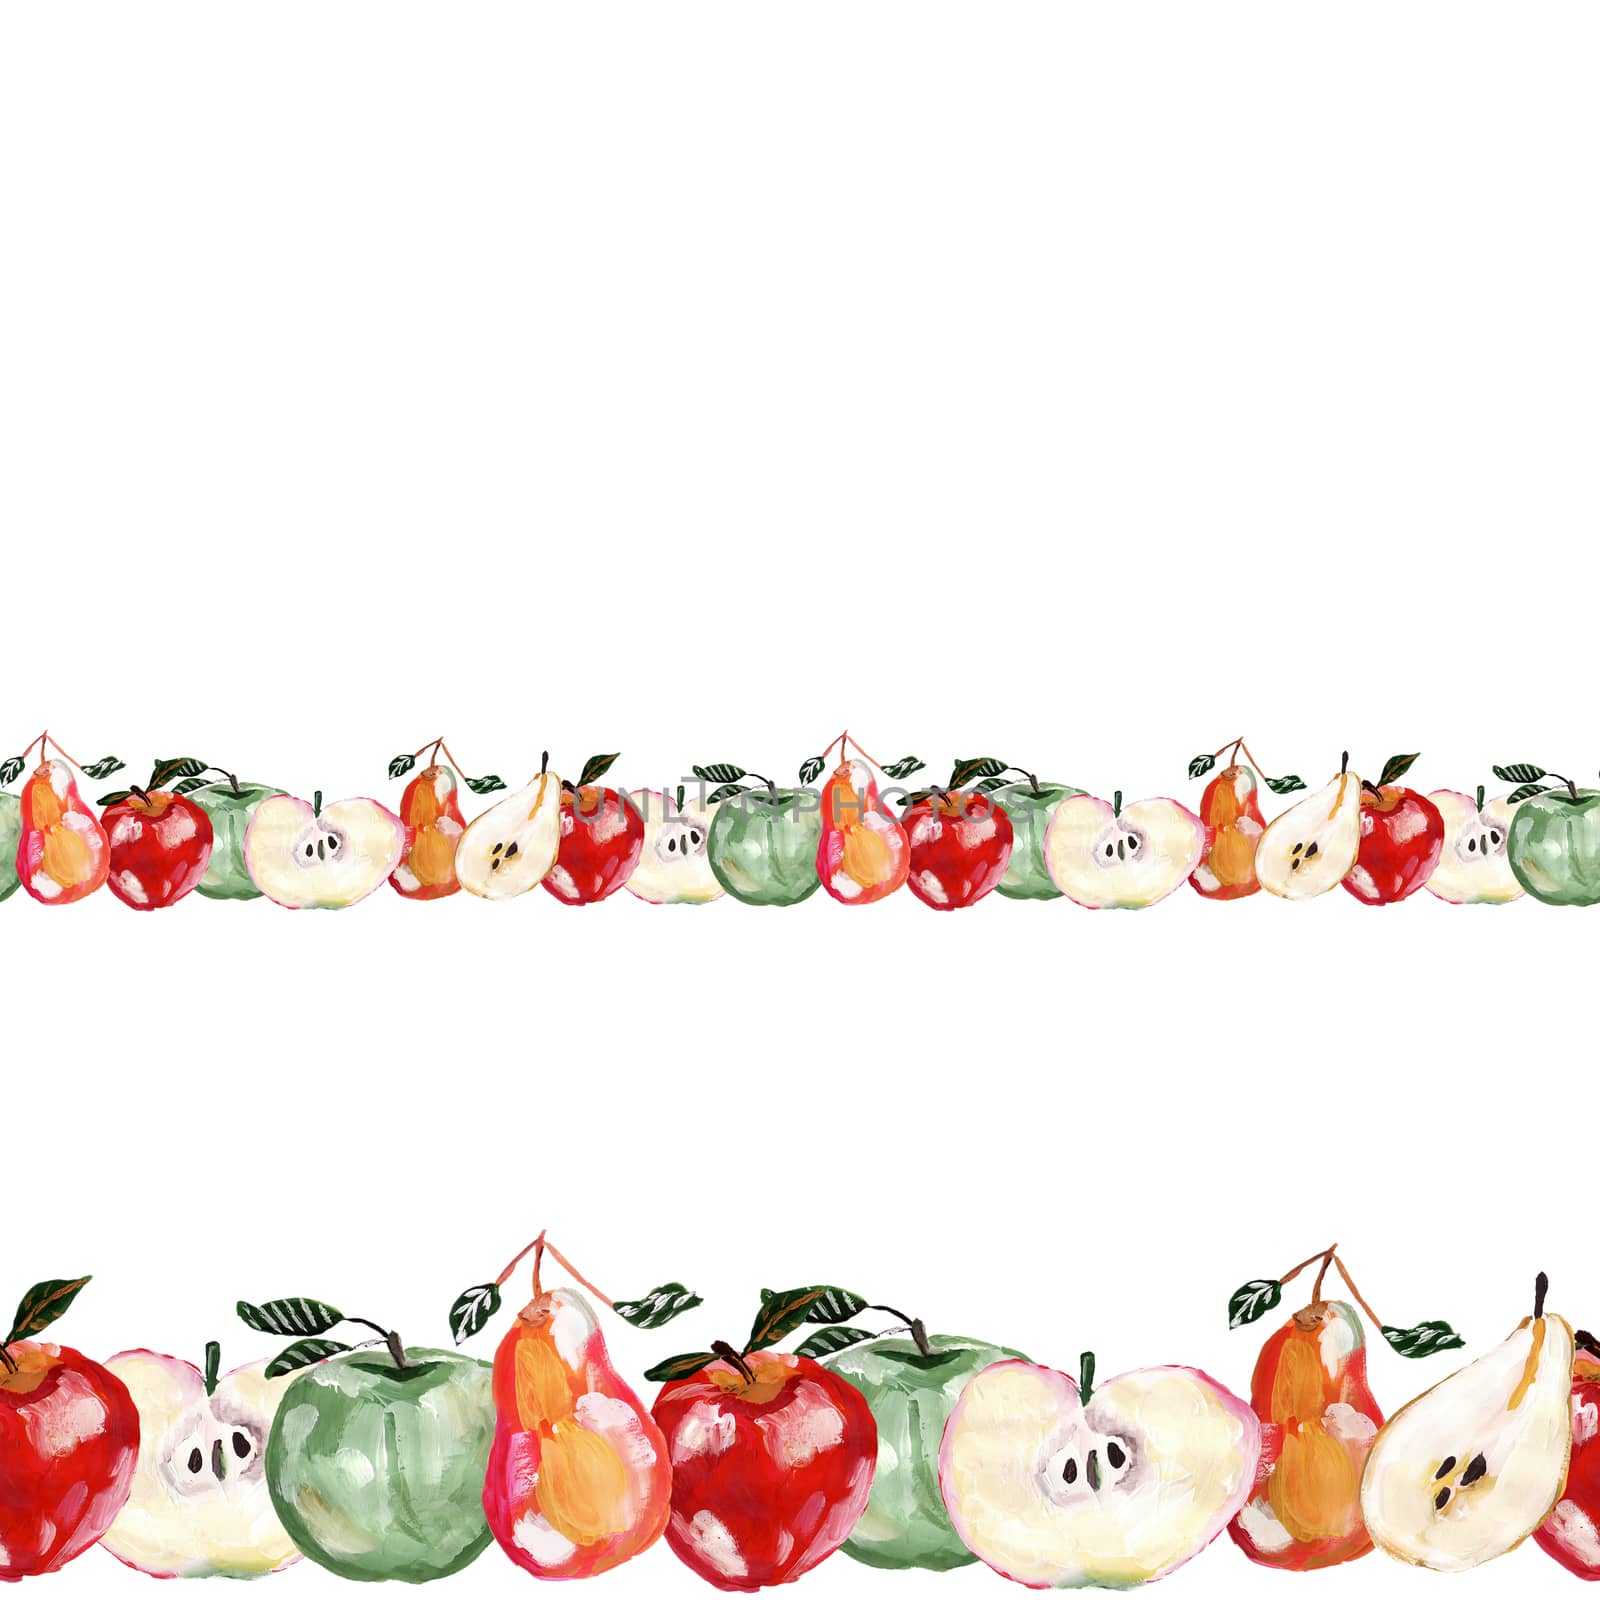 Repeat horizontal border design with hand drawn apples and pears on white background. by Nata_Prando